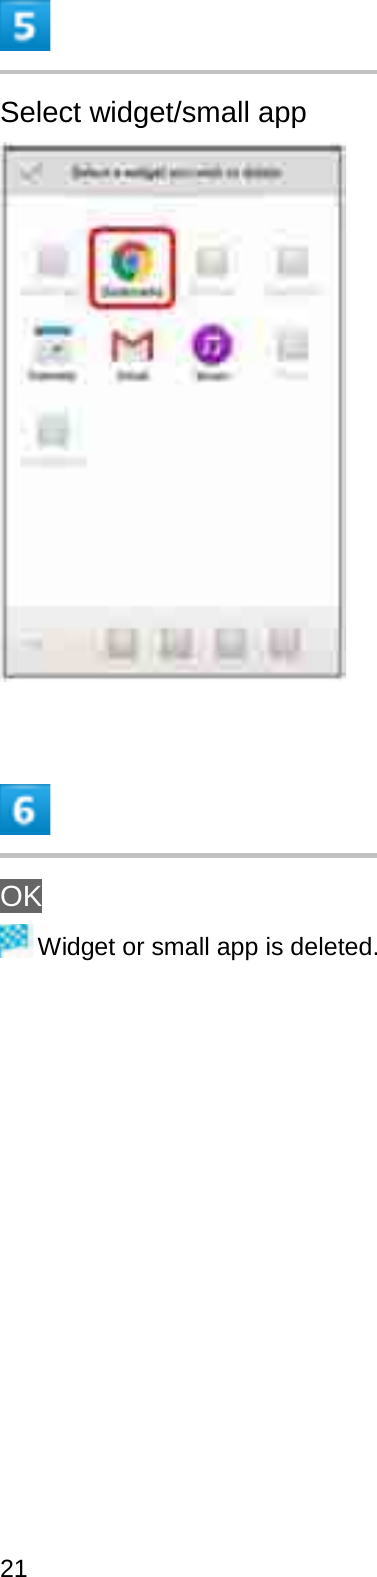 Select widget/small appOKWidget or small app is deleted.21